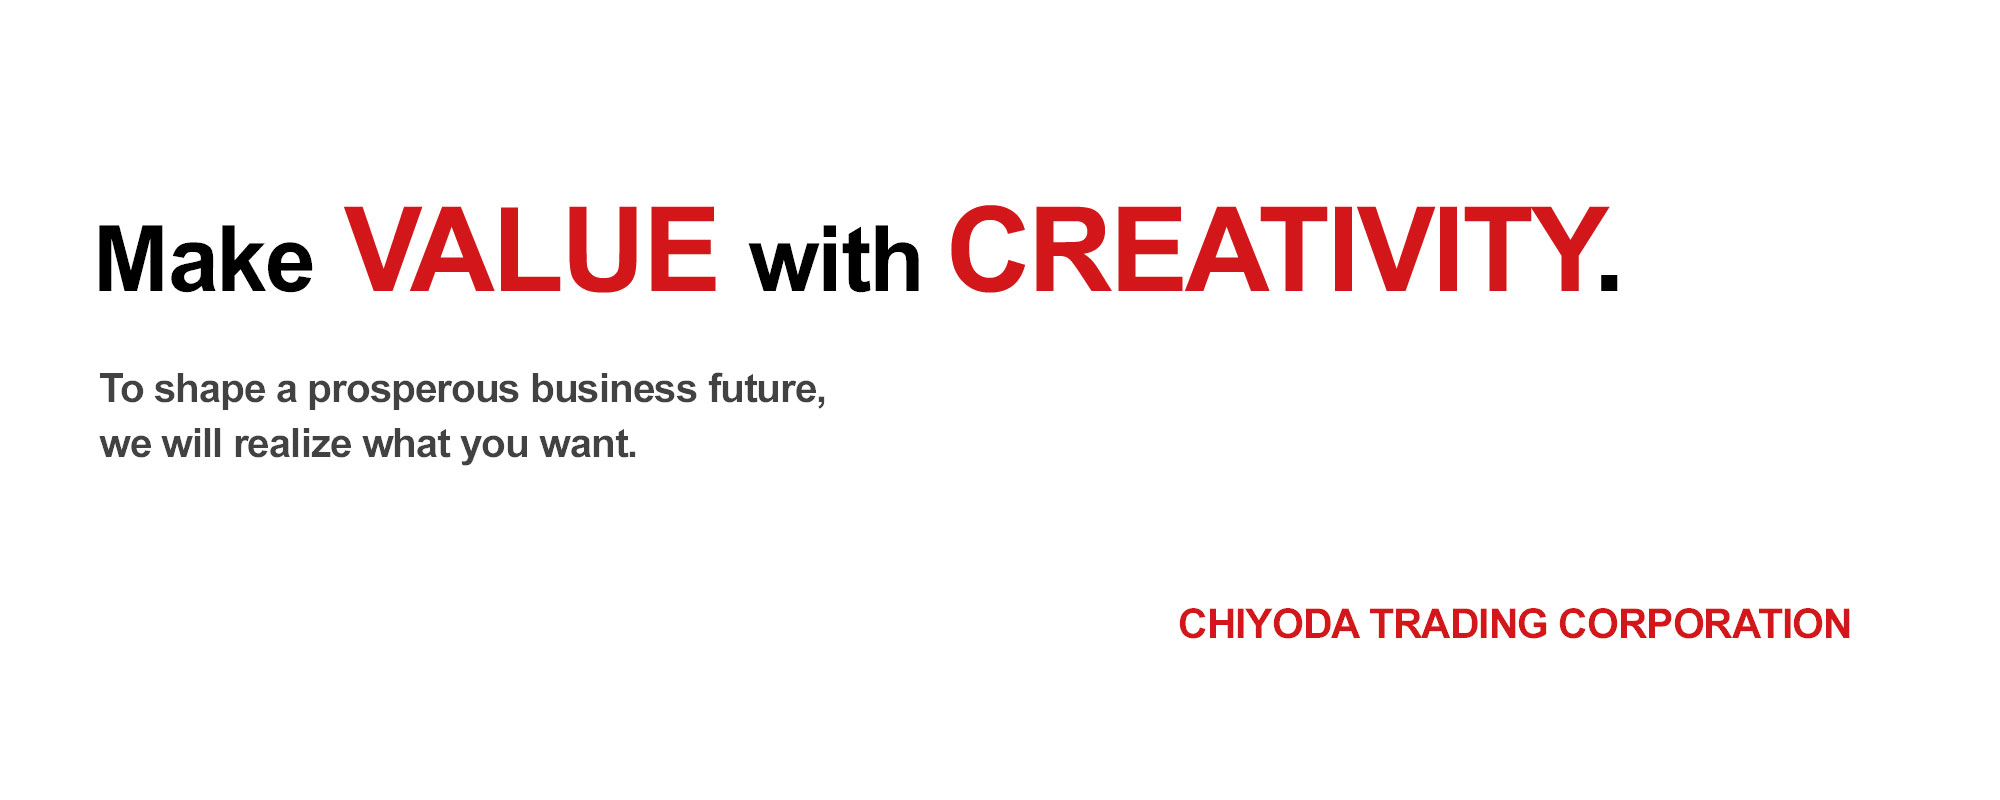 Make Value with Creativity. To shape a prosperous business future, we will realize what you want. CHIYODA TRADING CORPORATION